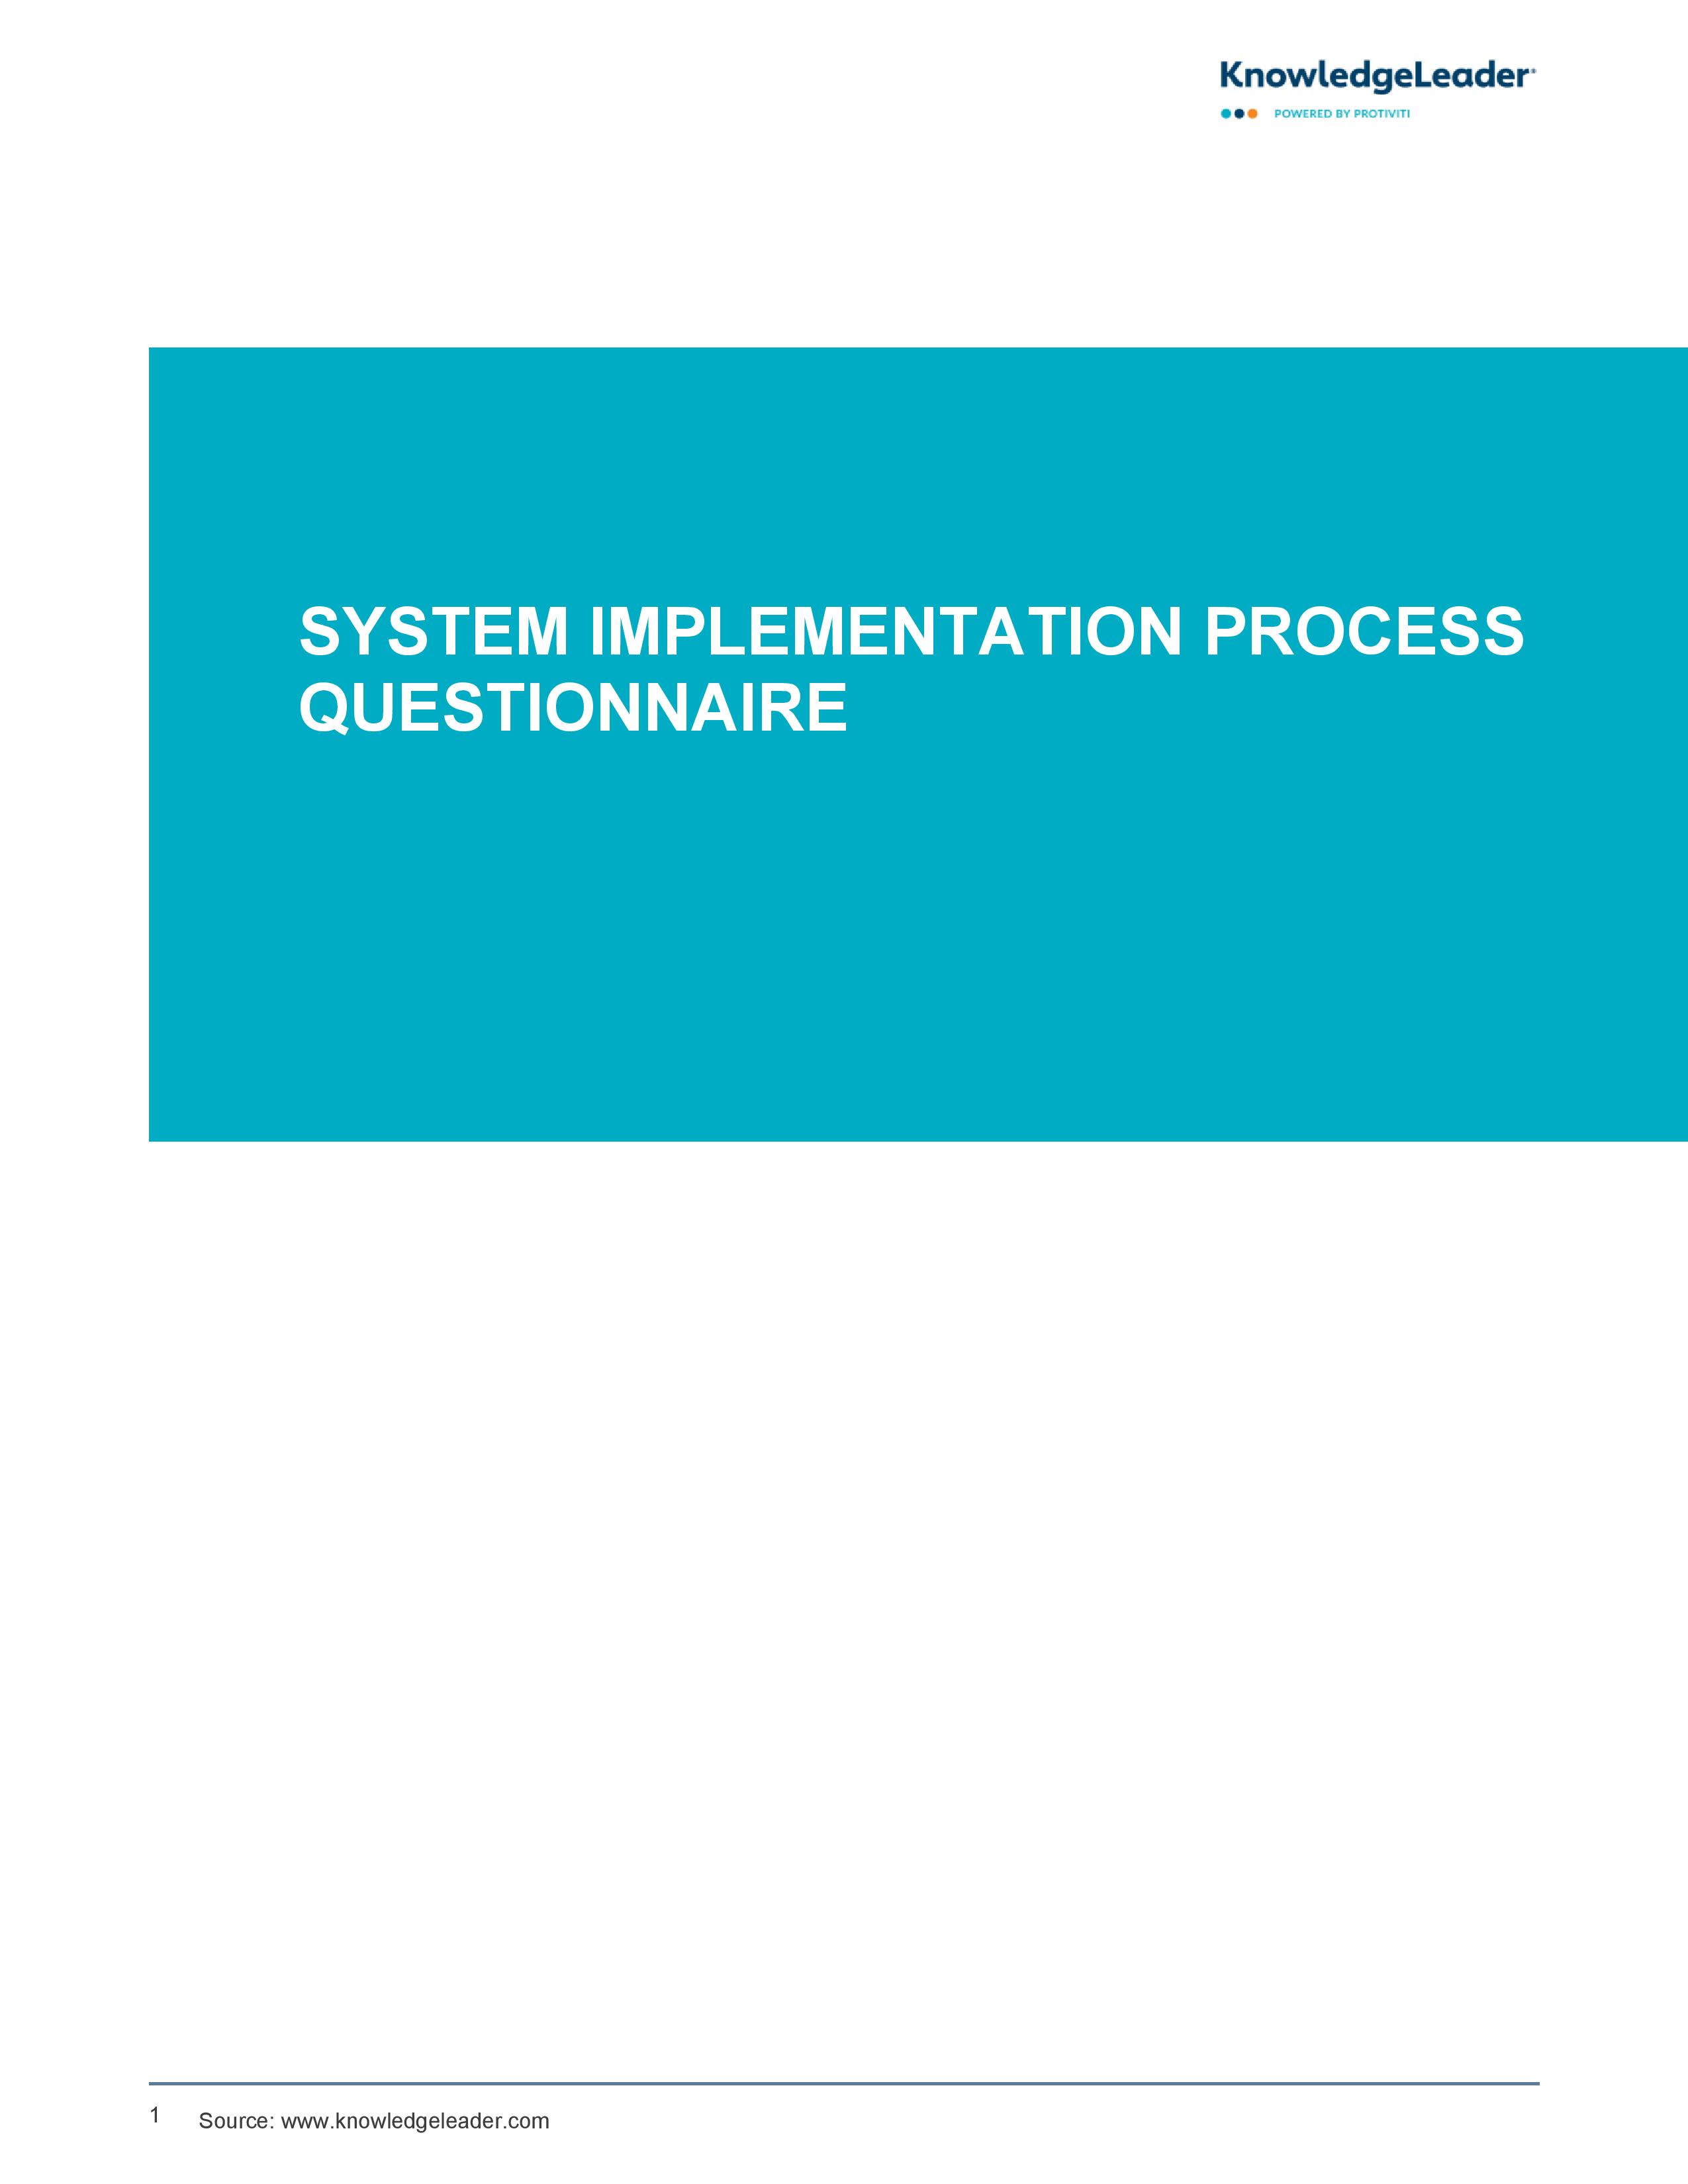 Screenshot of the first page of System Implementation Process Questionnaire